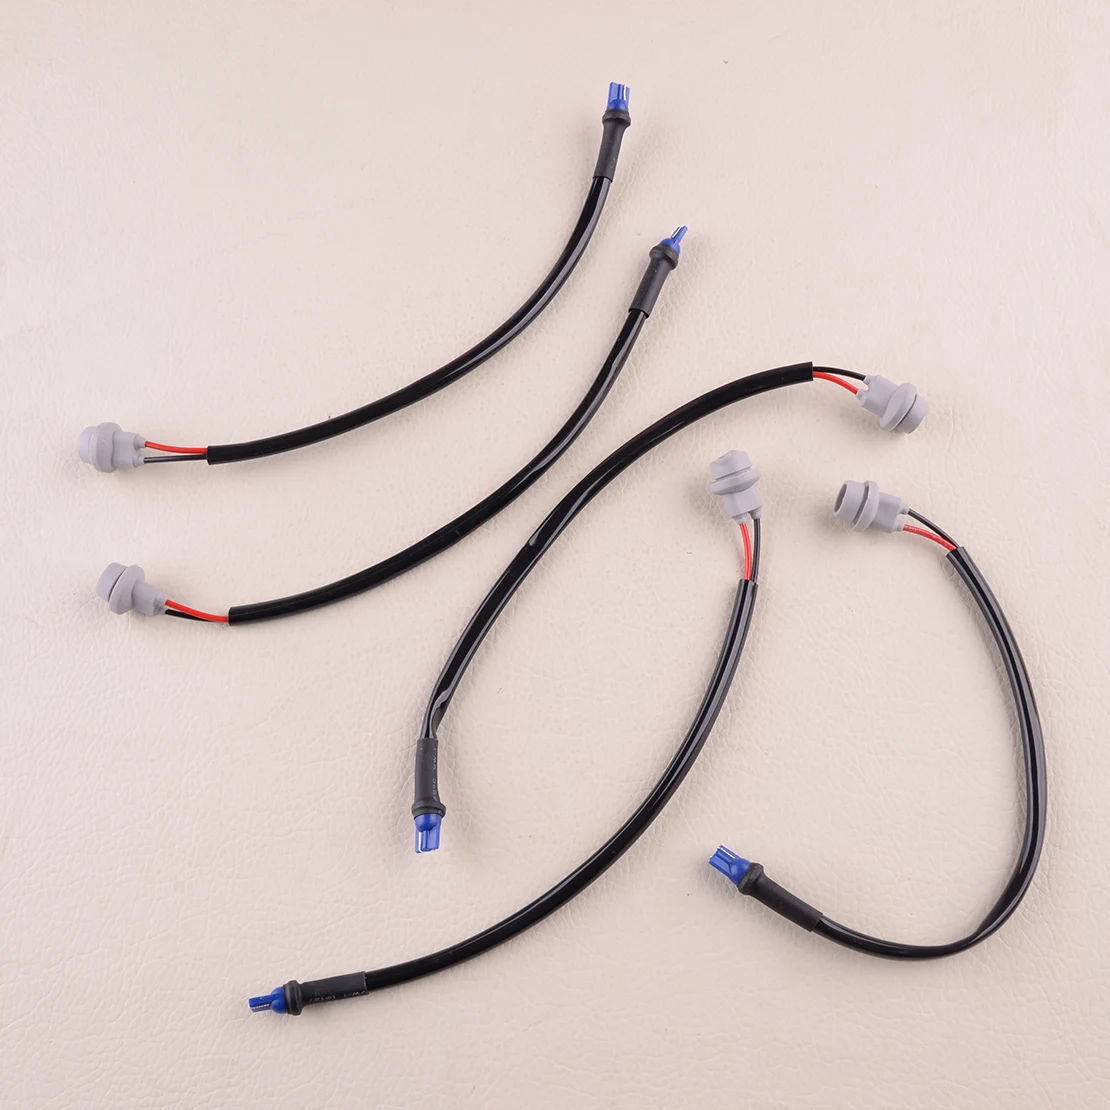 5x Clearance running light T10 Socket Extension Replacement Holder Wire Harness 